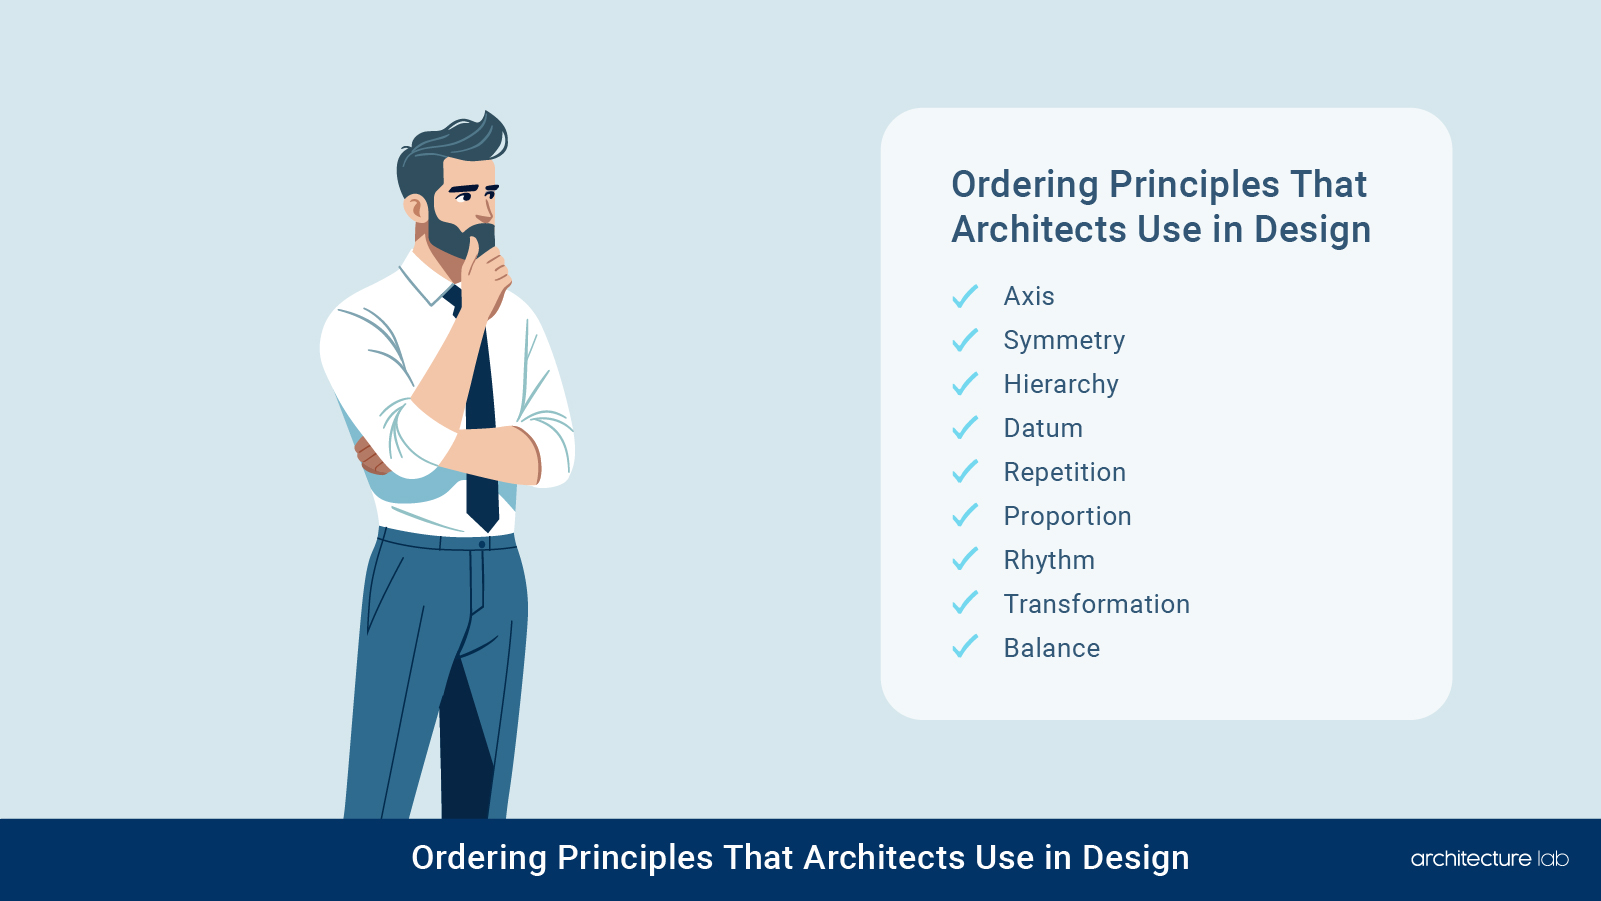 What are the ordering principles that architects use in design?